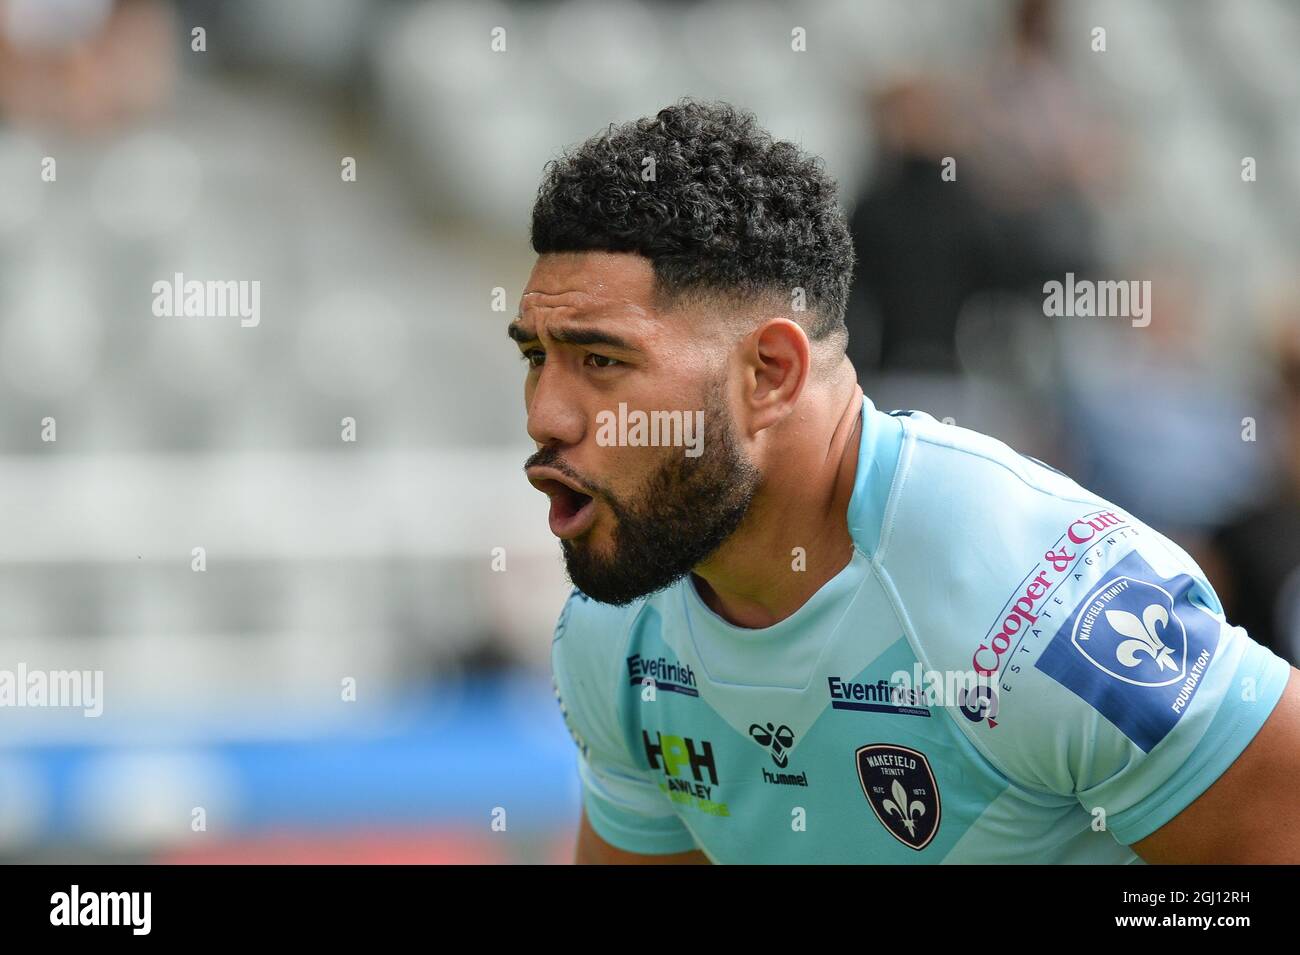 Newcastle, England - 5 September 2021 - Wakefield Trinity's Kelepi Tanginoa during the Rugby League Betfred Super League Magic Weekend Huddersfield Giants vs Wakefield Trinity at St James' Park Stadium, Newcastle, UK Stock Photo